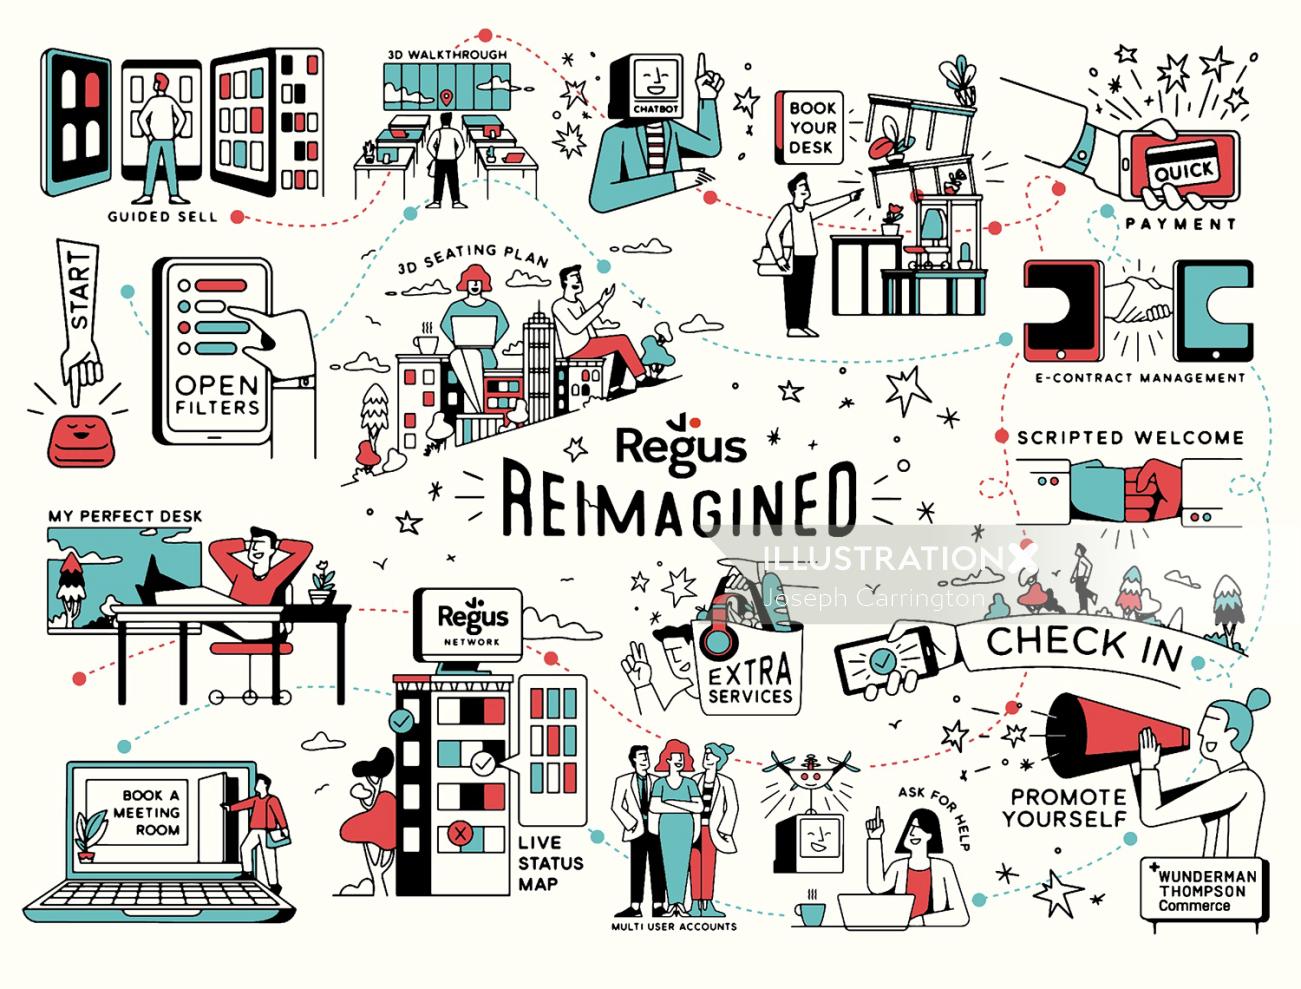 Regus Reimagined Illustrated booking process map
